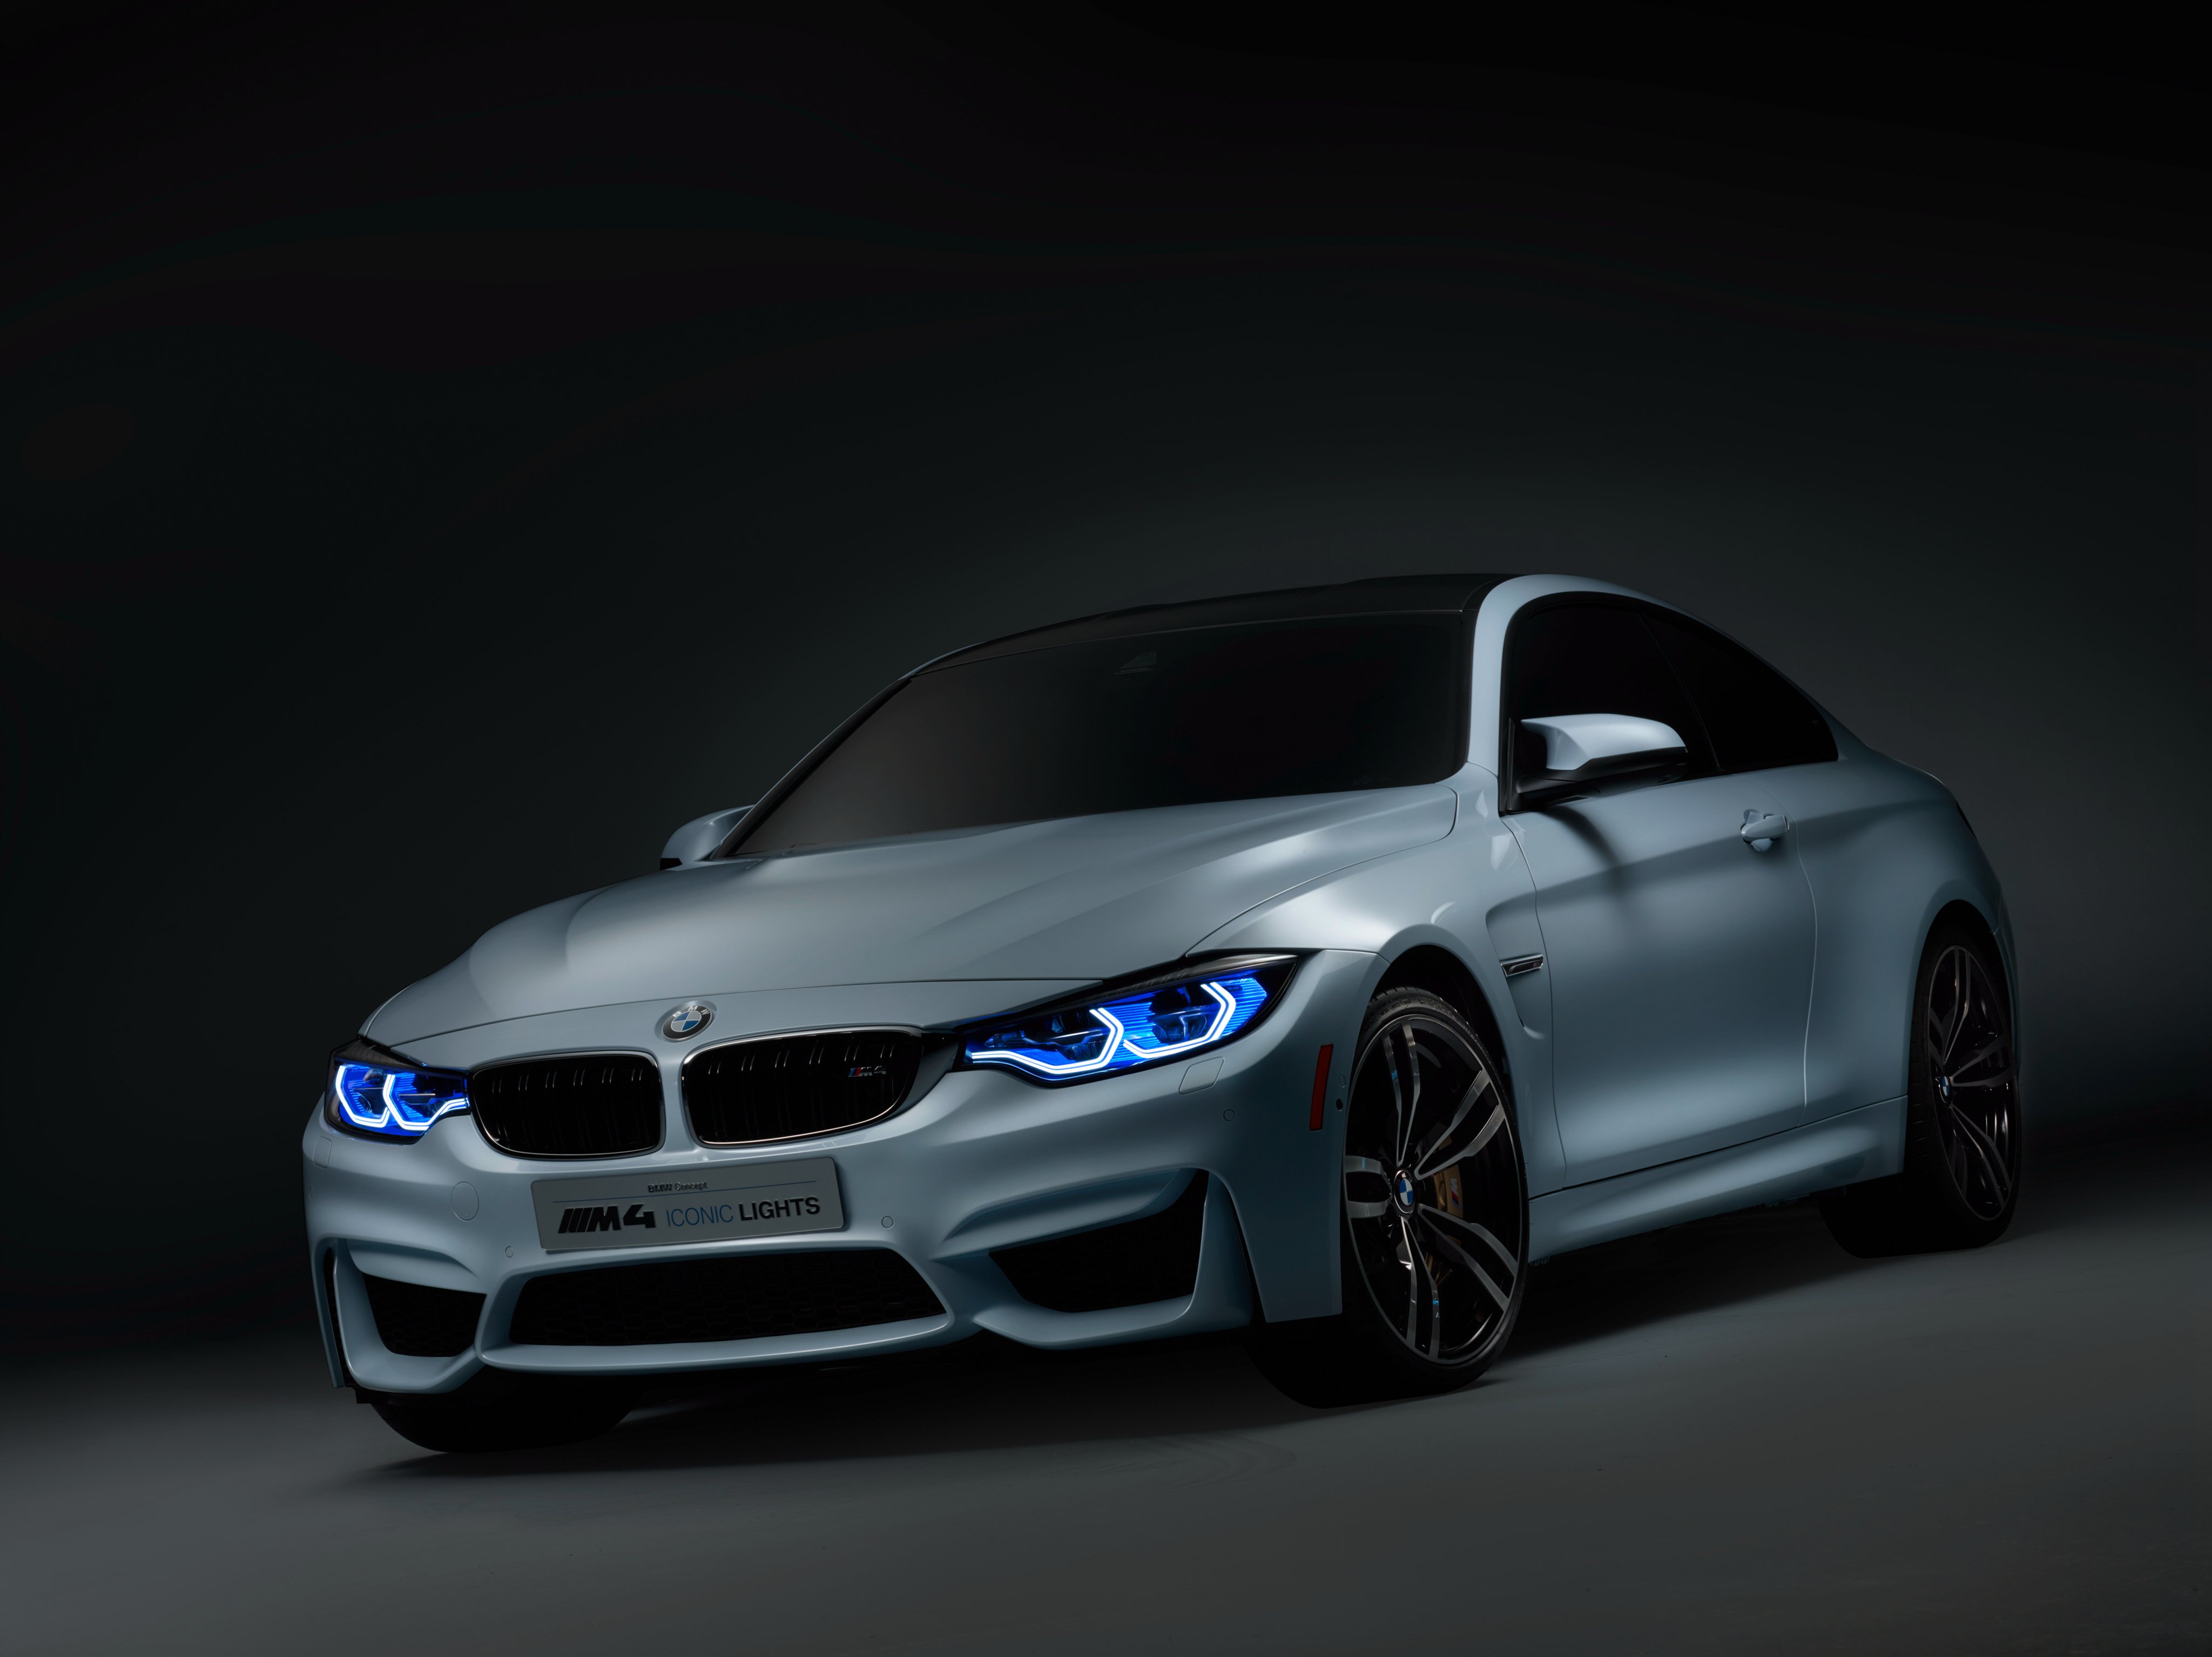 2015, Bmw, Concept, M 4, Iconic, Lights, F82, Tuning, Electric Wallpaper